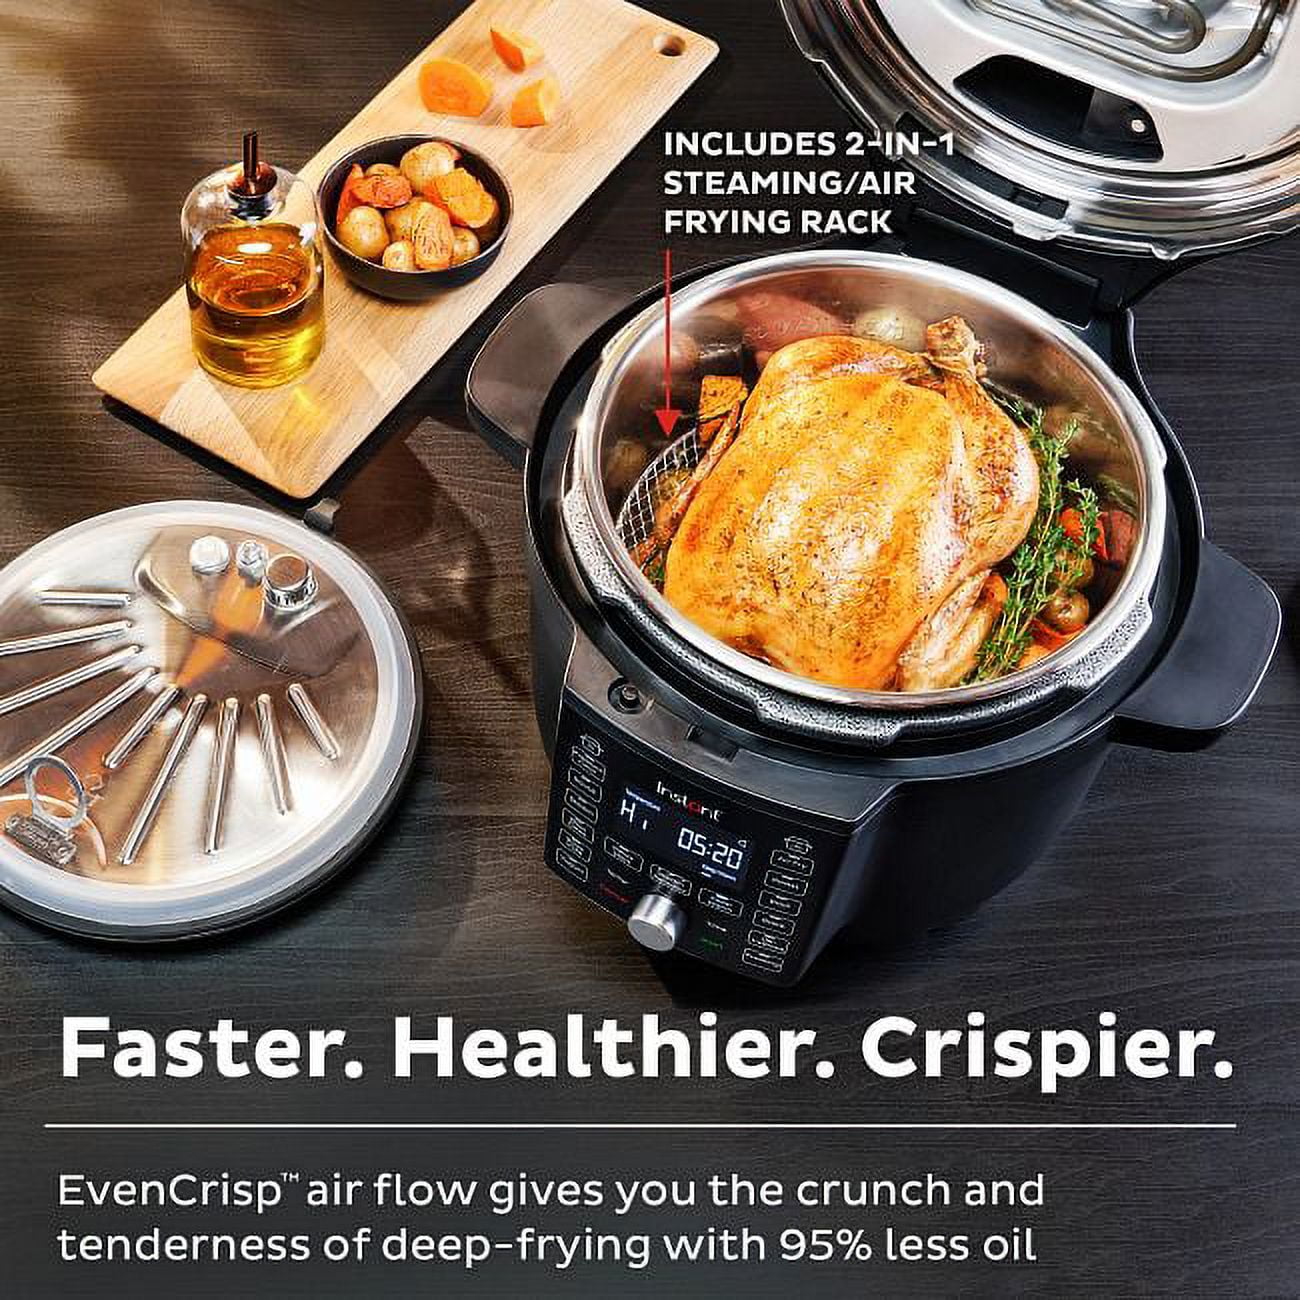 Instant Pot Multicookers, Air Fryers And More Are Up To 44% Off On